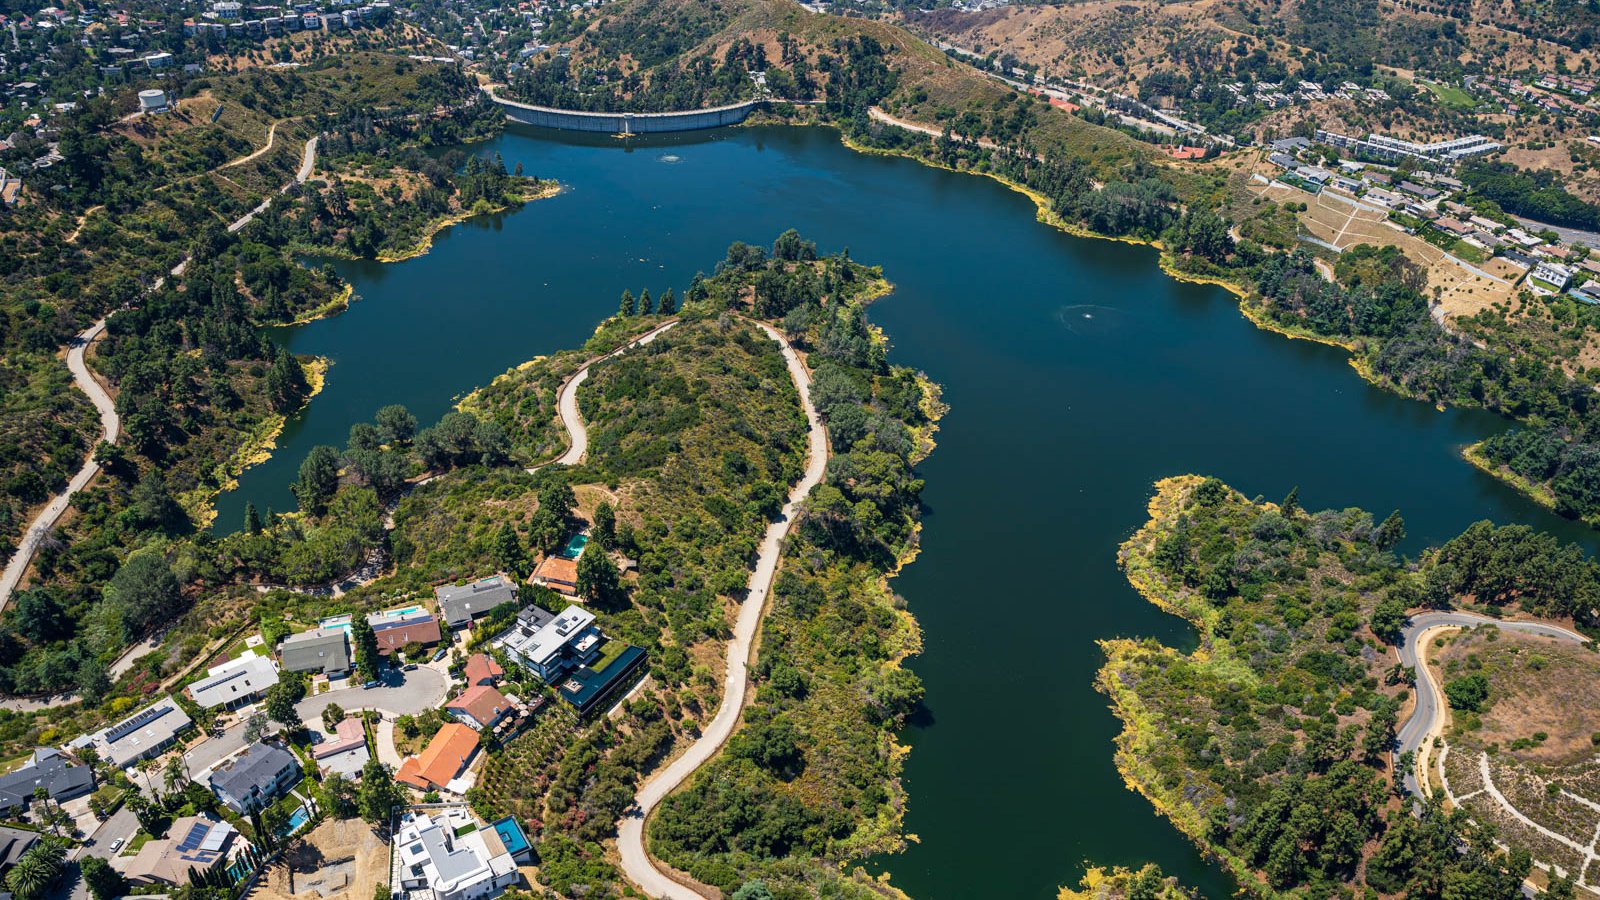 Blog image of the large homes along the edges of the Hollywood Reservoir